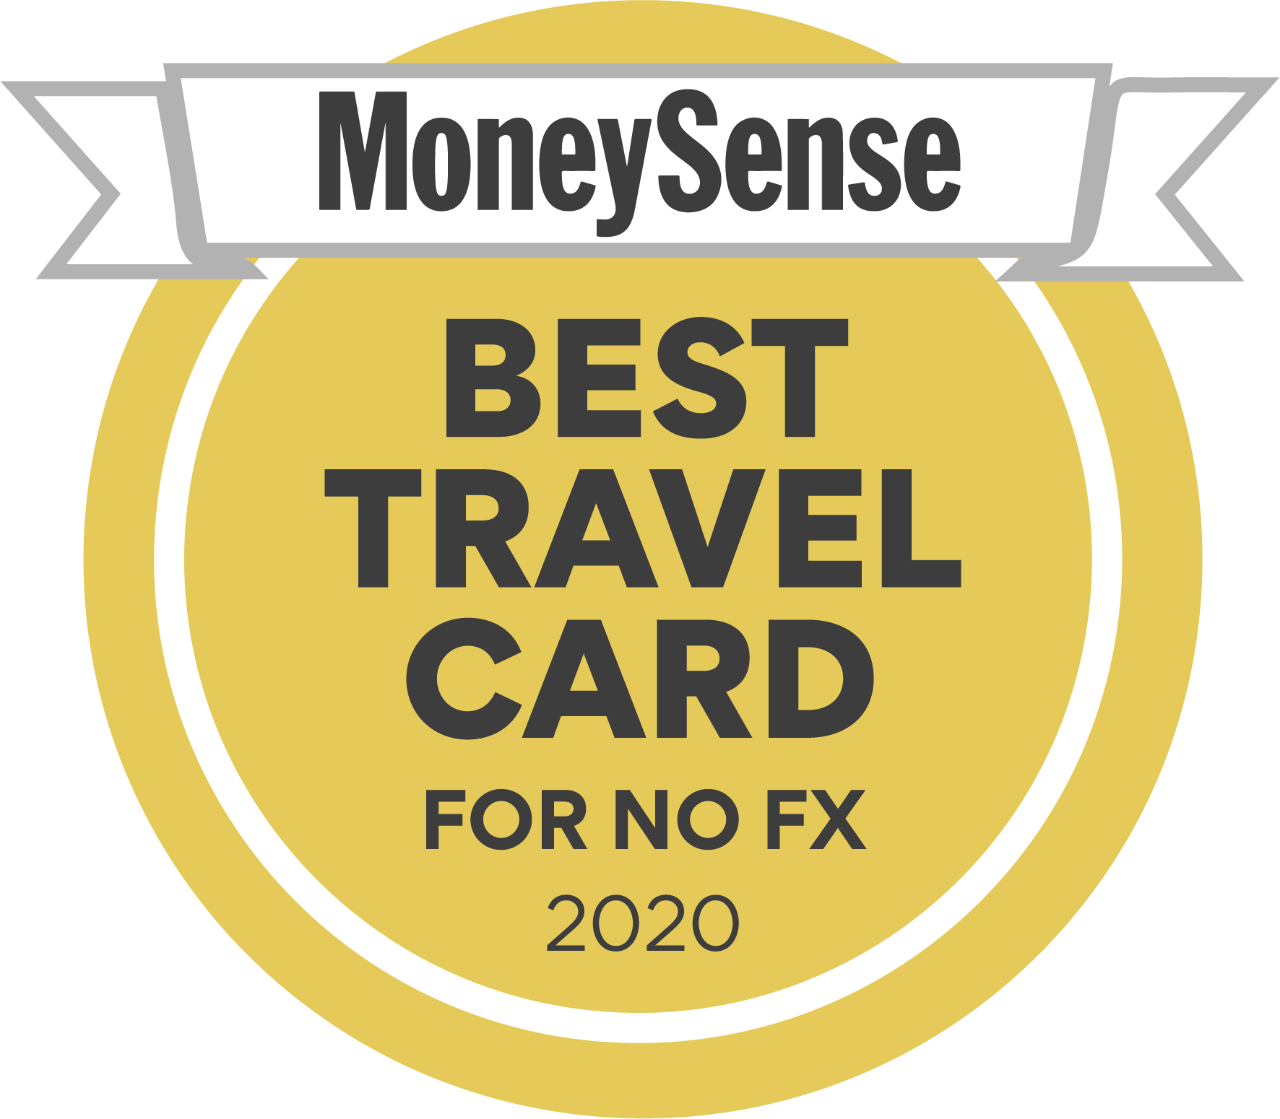 Badge: Best Travel Card for No FX 2020 by MoneySense